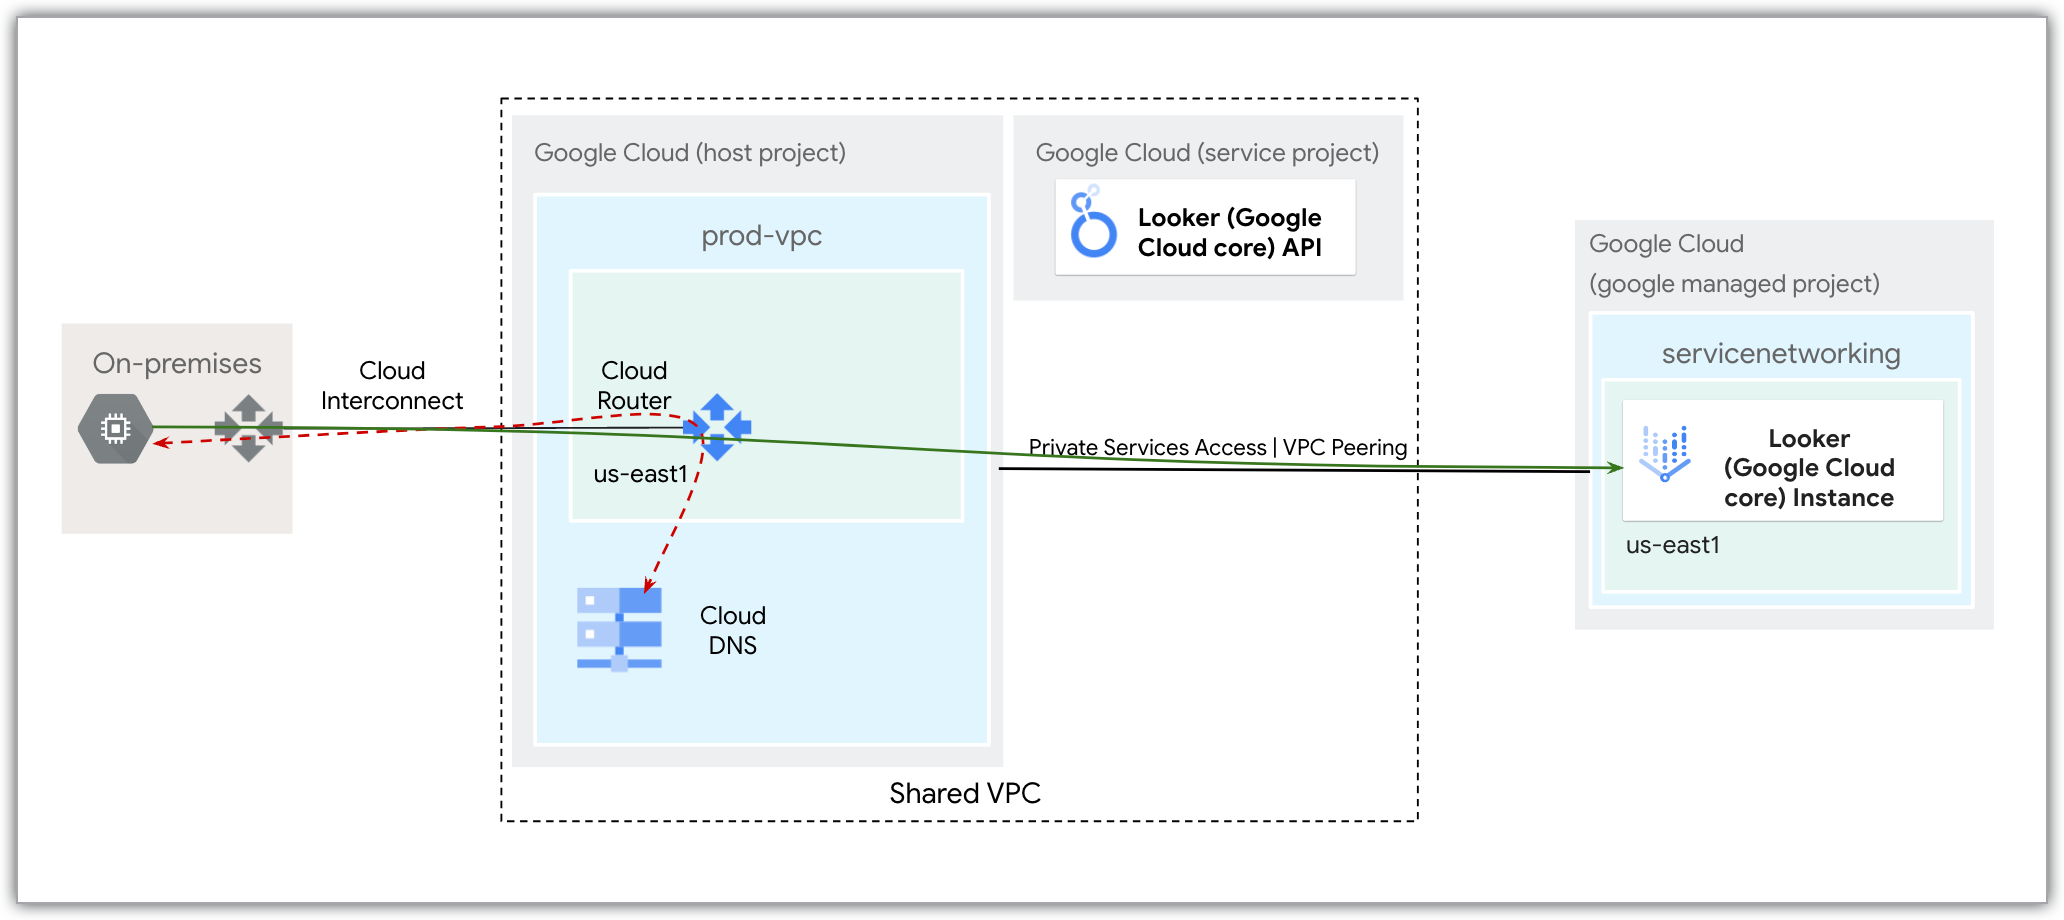 A Google Cloud network showing secure access to a Looker (Google Cloud core) instance for traffic within the same region, using Cloud DNS, Cloud Router, Cloud Interconnect, and Private Services Access.